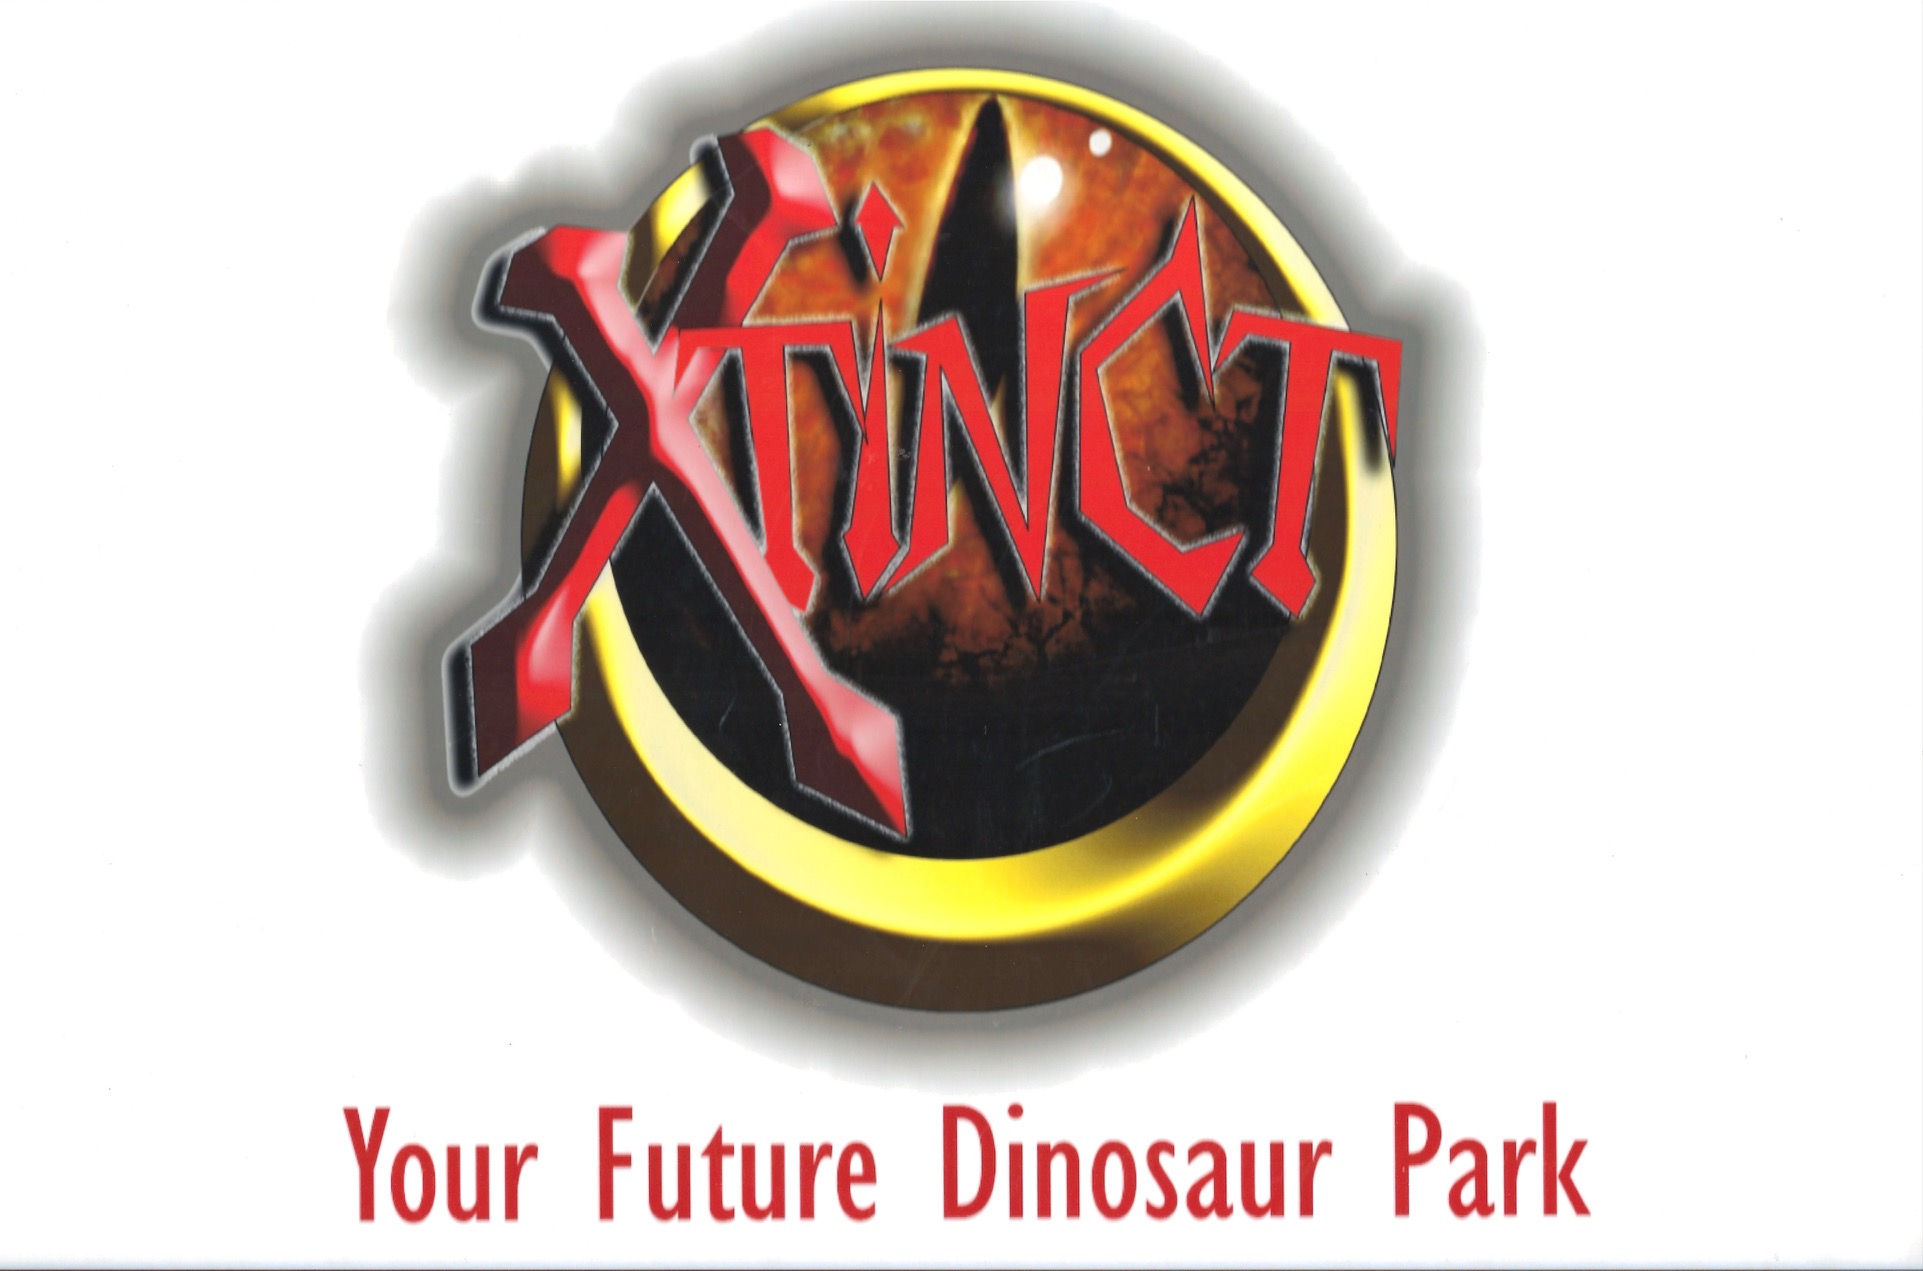 Southport Pleasureland has revealed plans for a new environmentally friendly Dinosaur Park themed attraction 